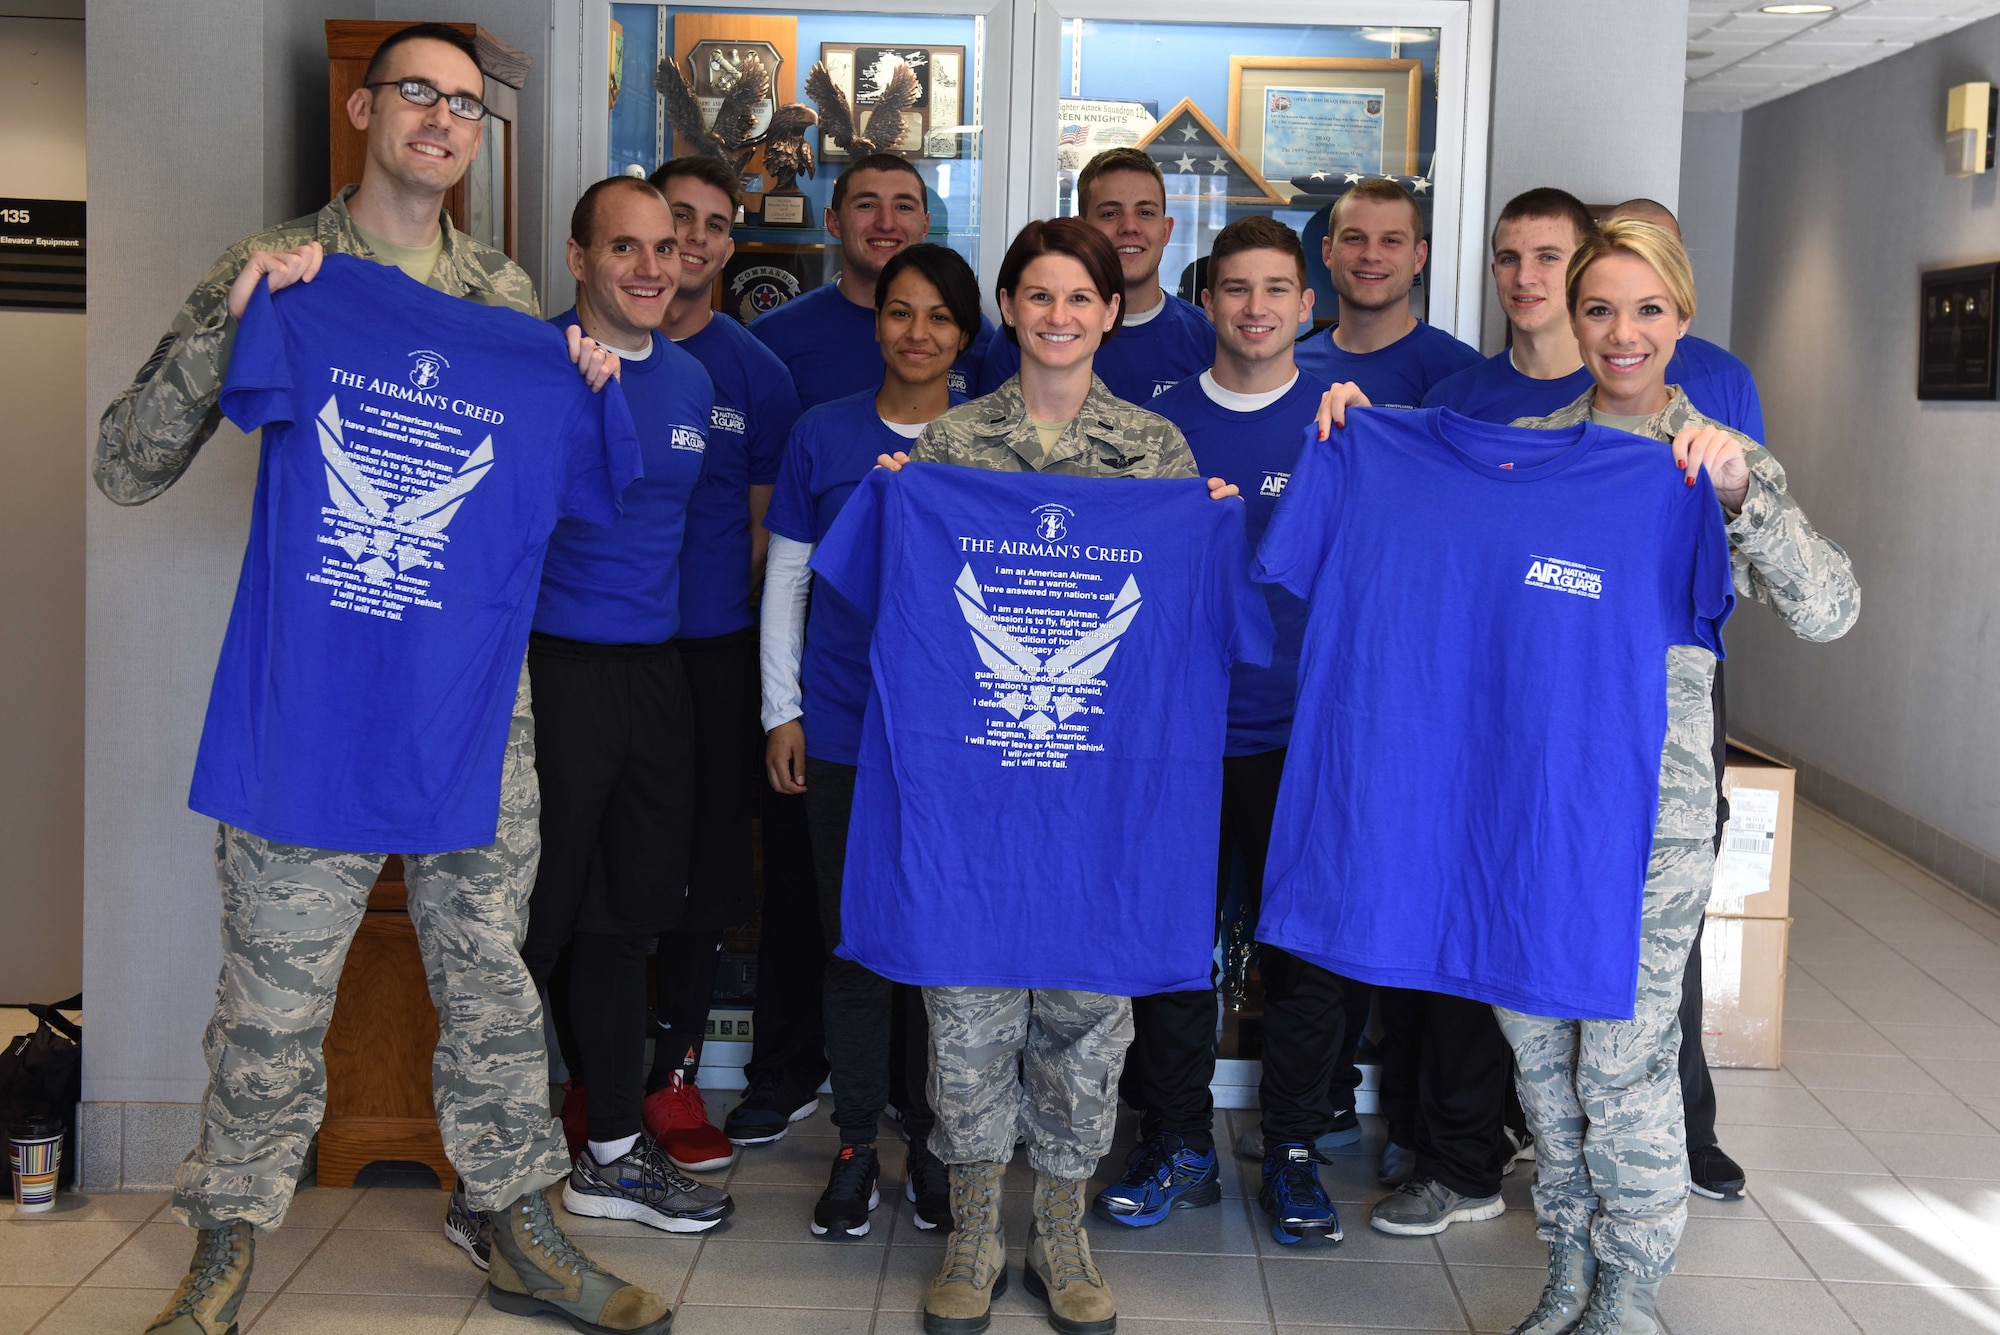 Members of the 193rd Special Operations Wing recruiting and retention team and Right Start program display new t-shirts that the 193rd SOW Association recently donated. The SOW Association sponsored the production of t-shirts to benefit the trainees of the Right Start program. More than 45 t-shirts were donated, which will serve as the uniforms for the participating trainees. Right Start is a program run by recruiting and retention and designed to bolster newly enlisted Airmen prior to military basic training. (U.S. Air National Guard photo by Staff Sgt. Claire Behney/Released)